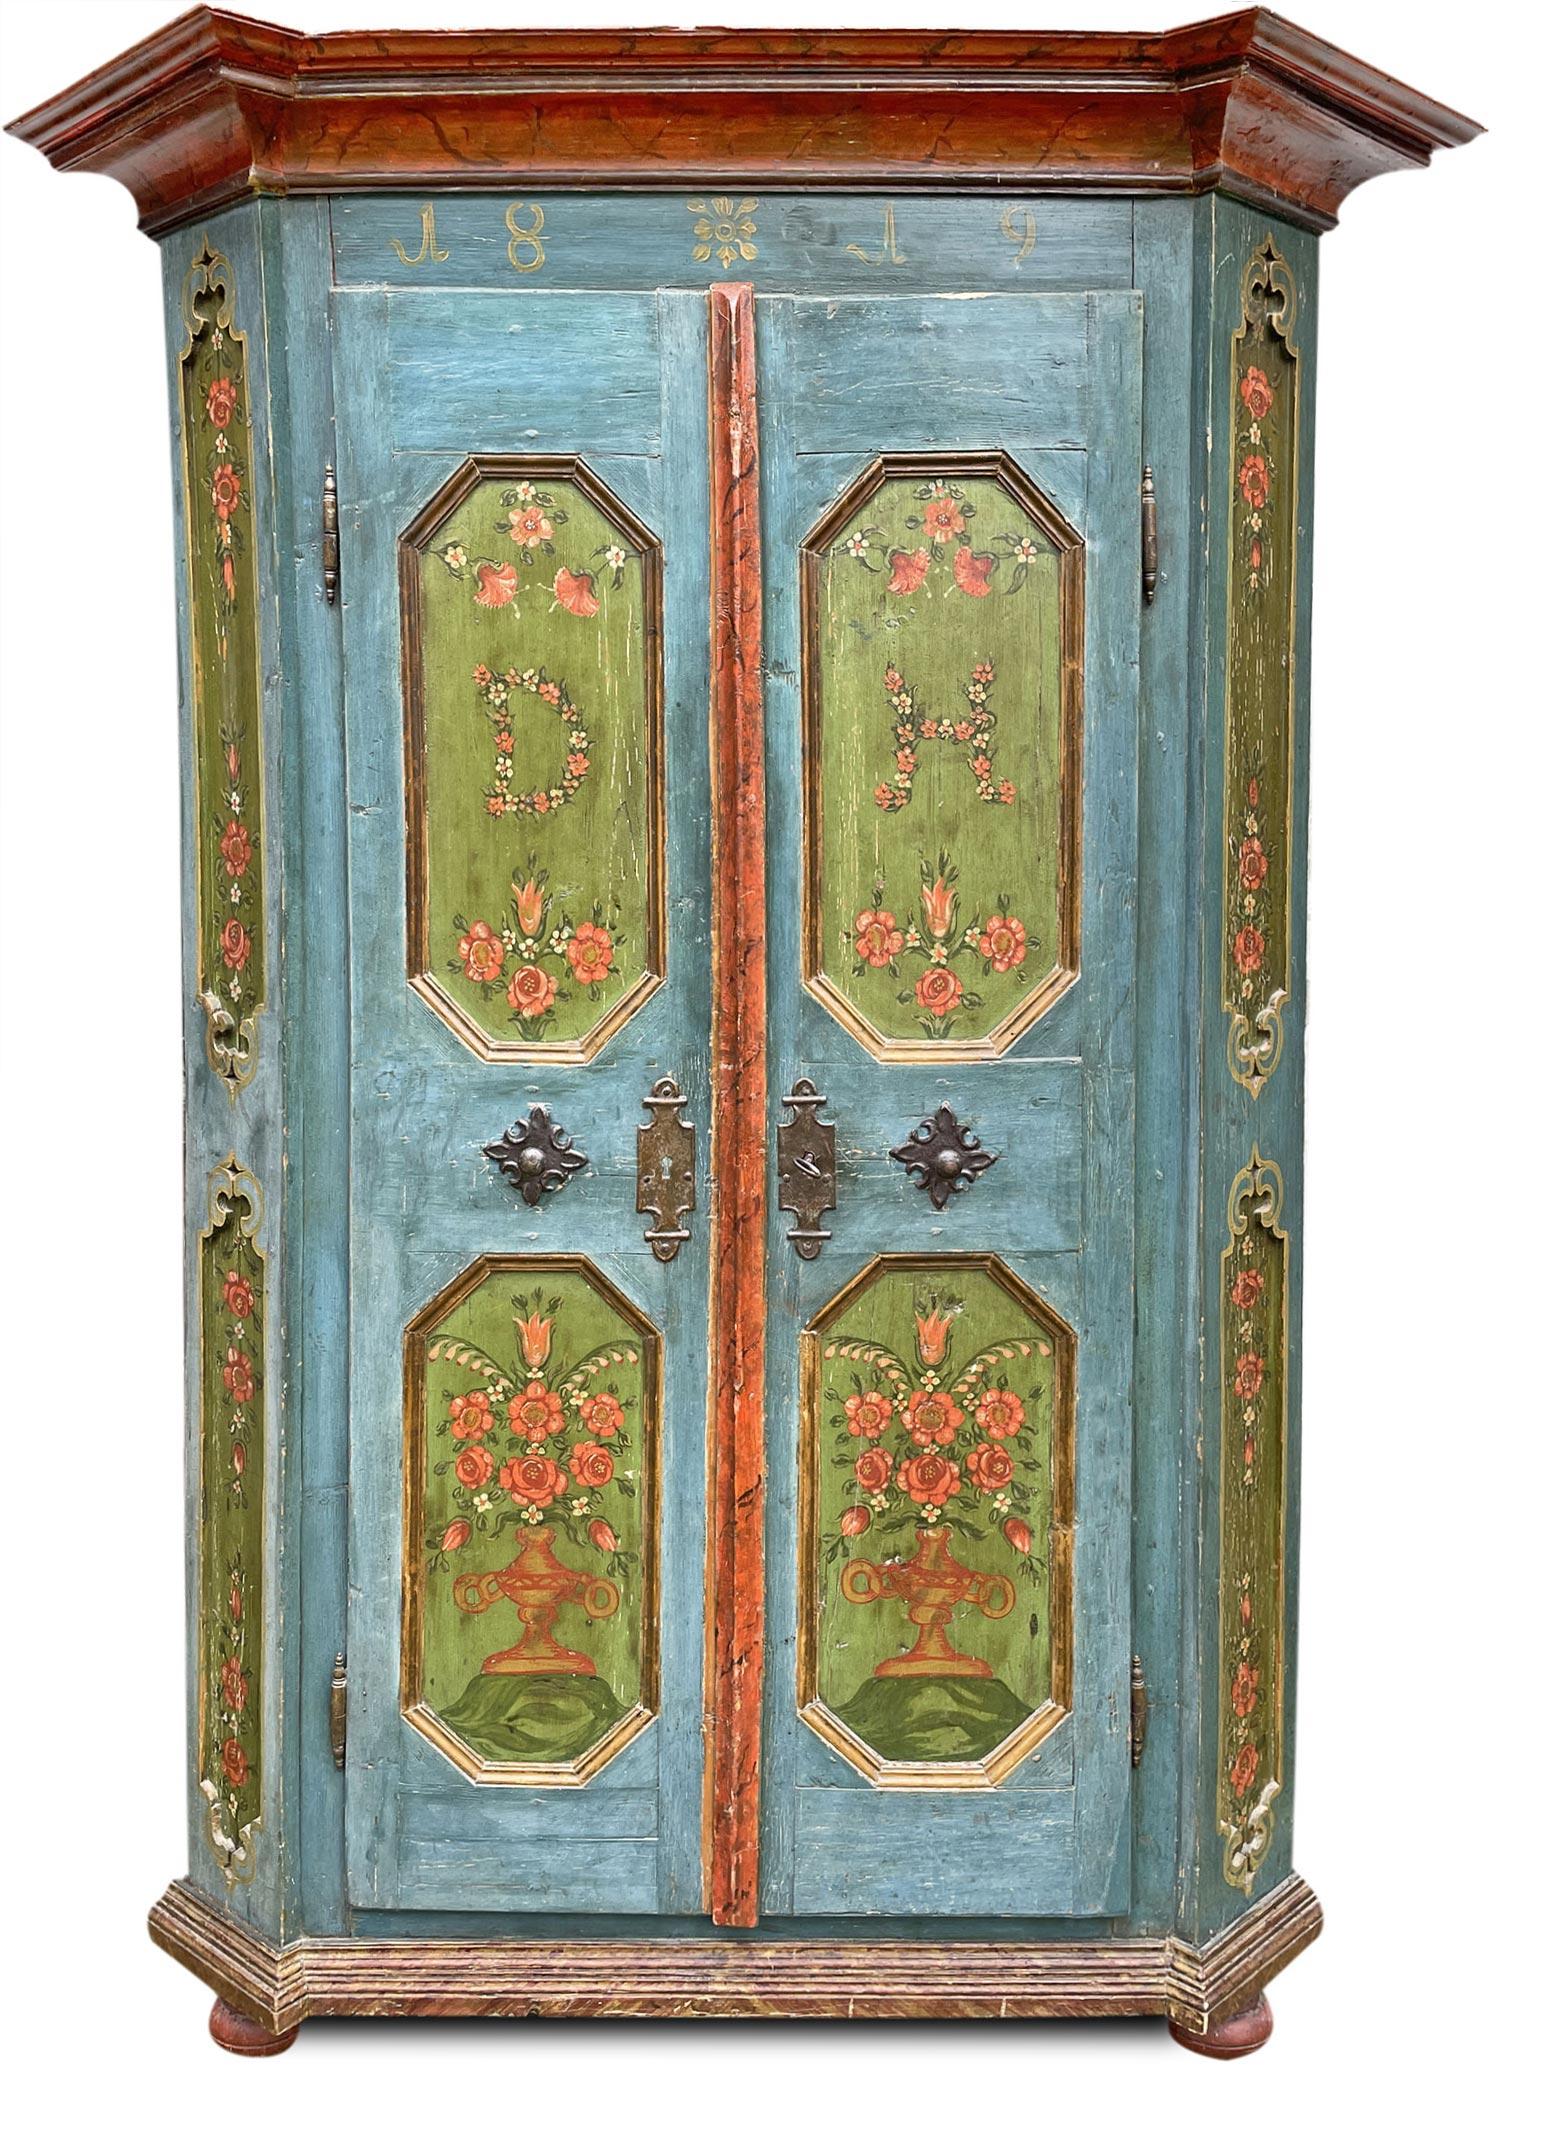 Tyrolean blue painted wardrobe dated 1819

Measures: H.190 cm - L.109 cm (146 to the frames) - P.42 cm (56 to the frames)

Beautiful painted wardrobe, with two doors, entirely painted in an intense blue color. On the doors four octagonal and